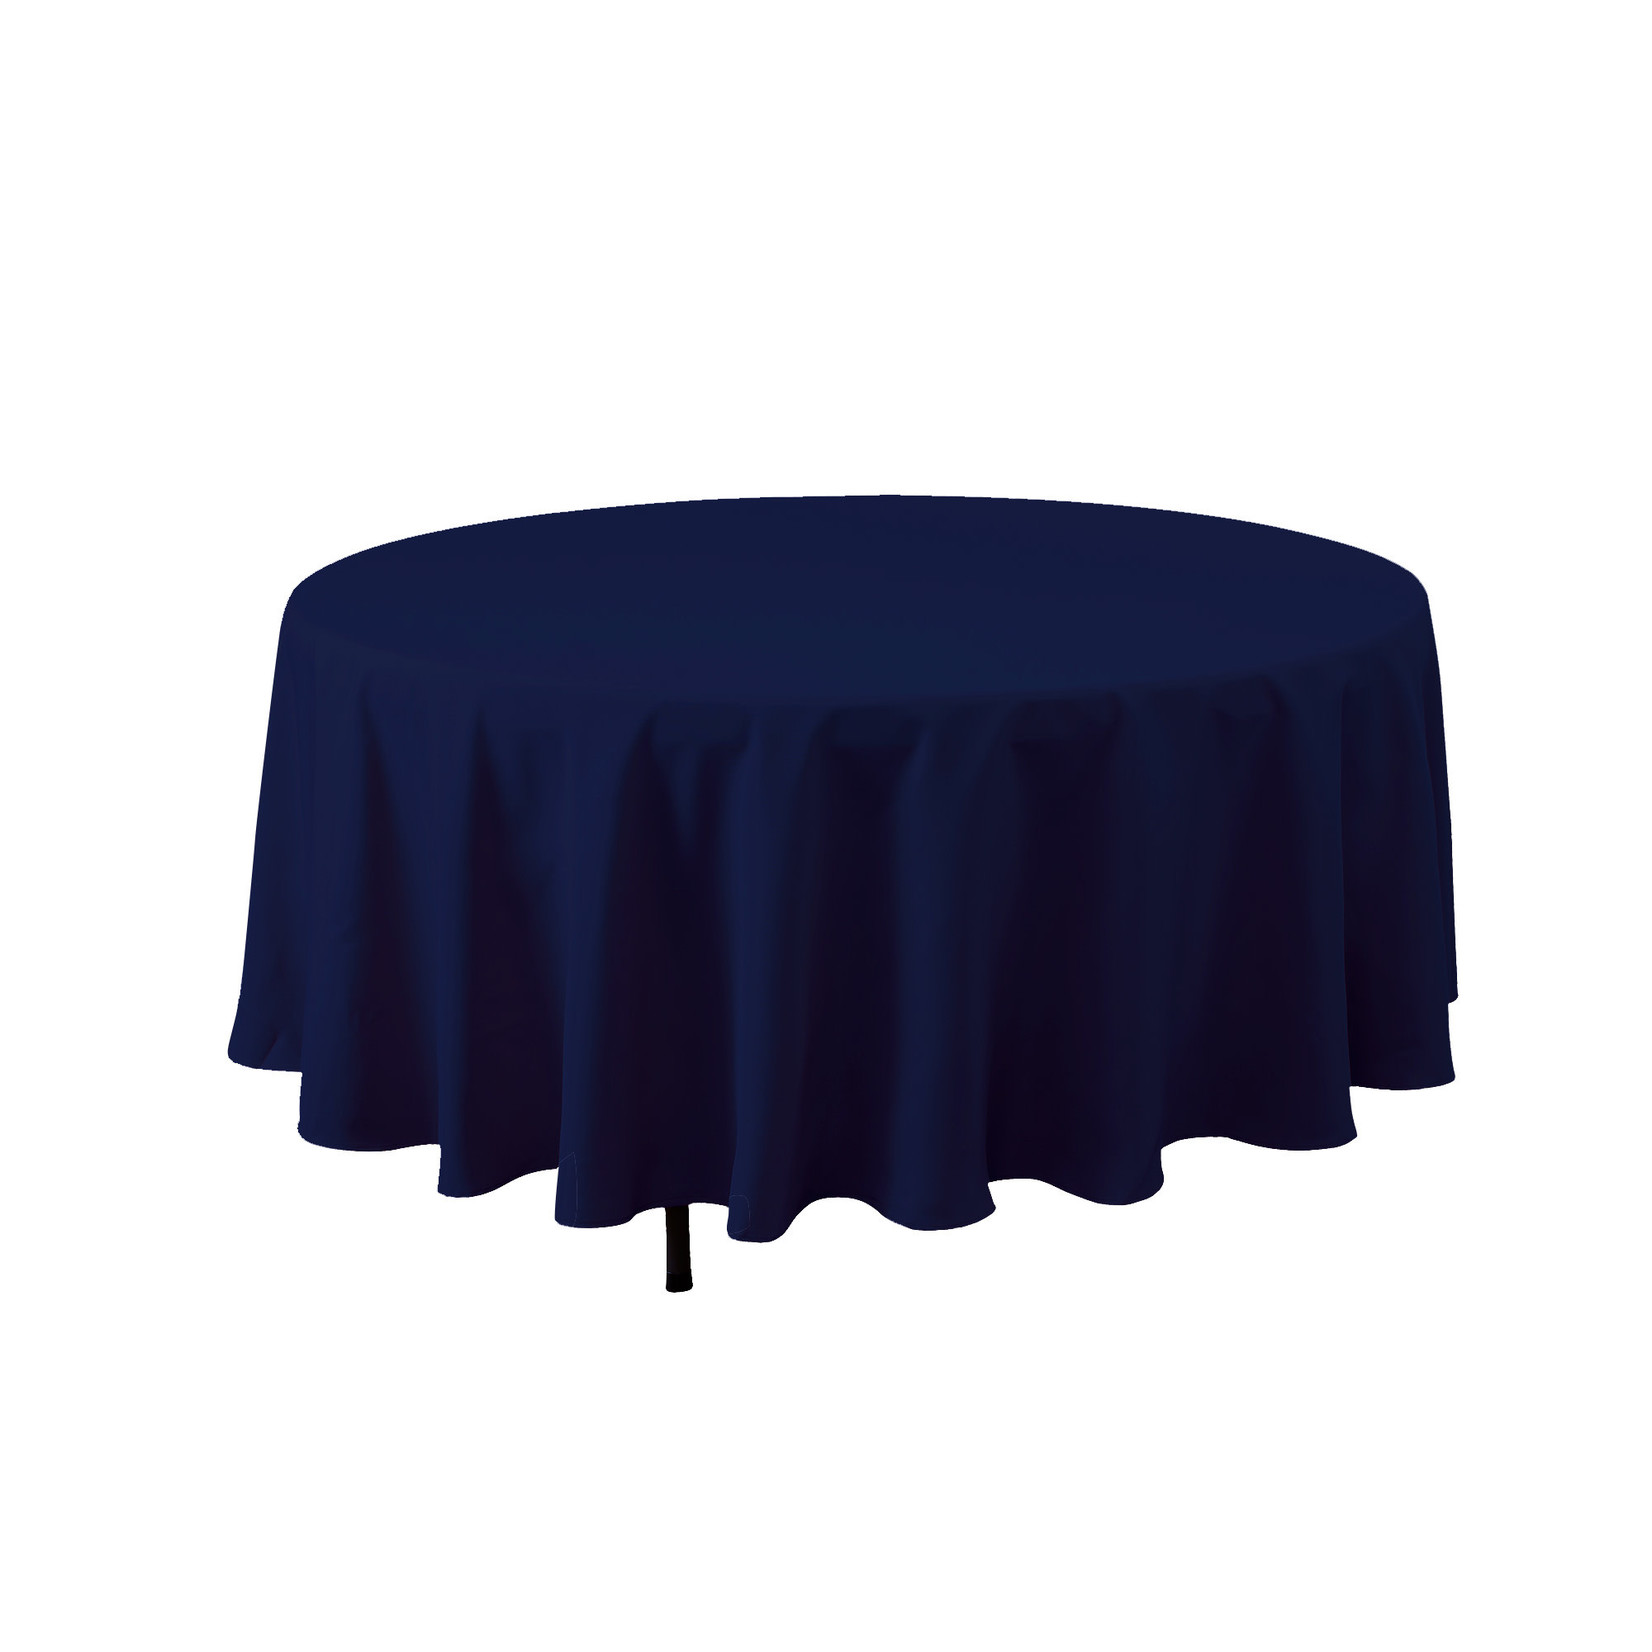 NAVY ROUND POLYESTER TABLE COVER 90''